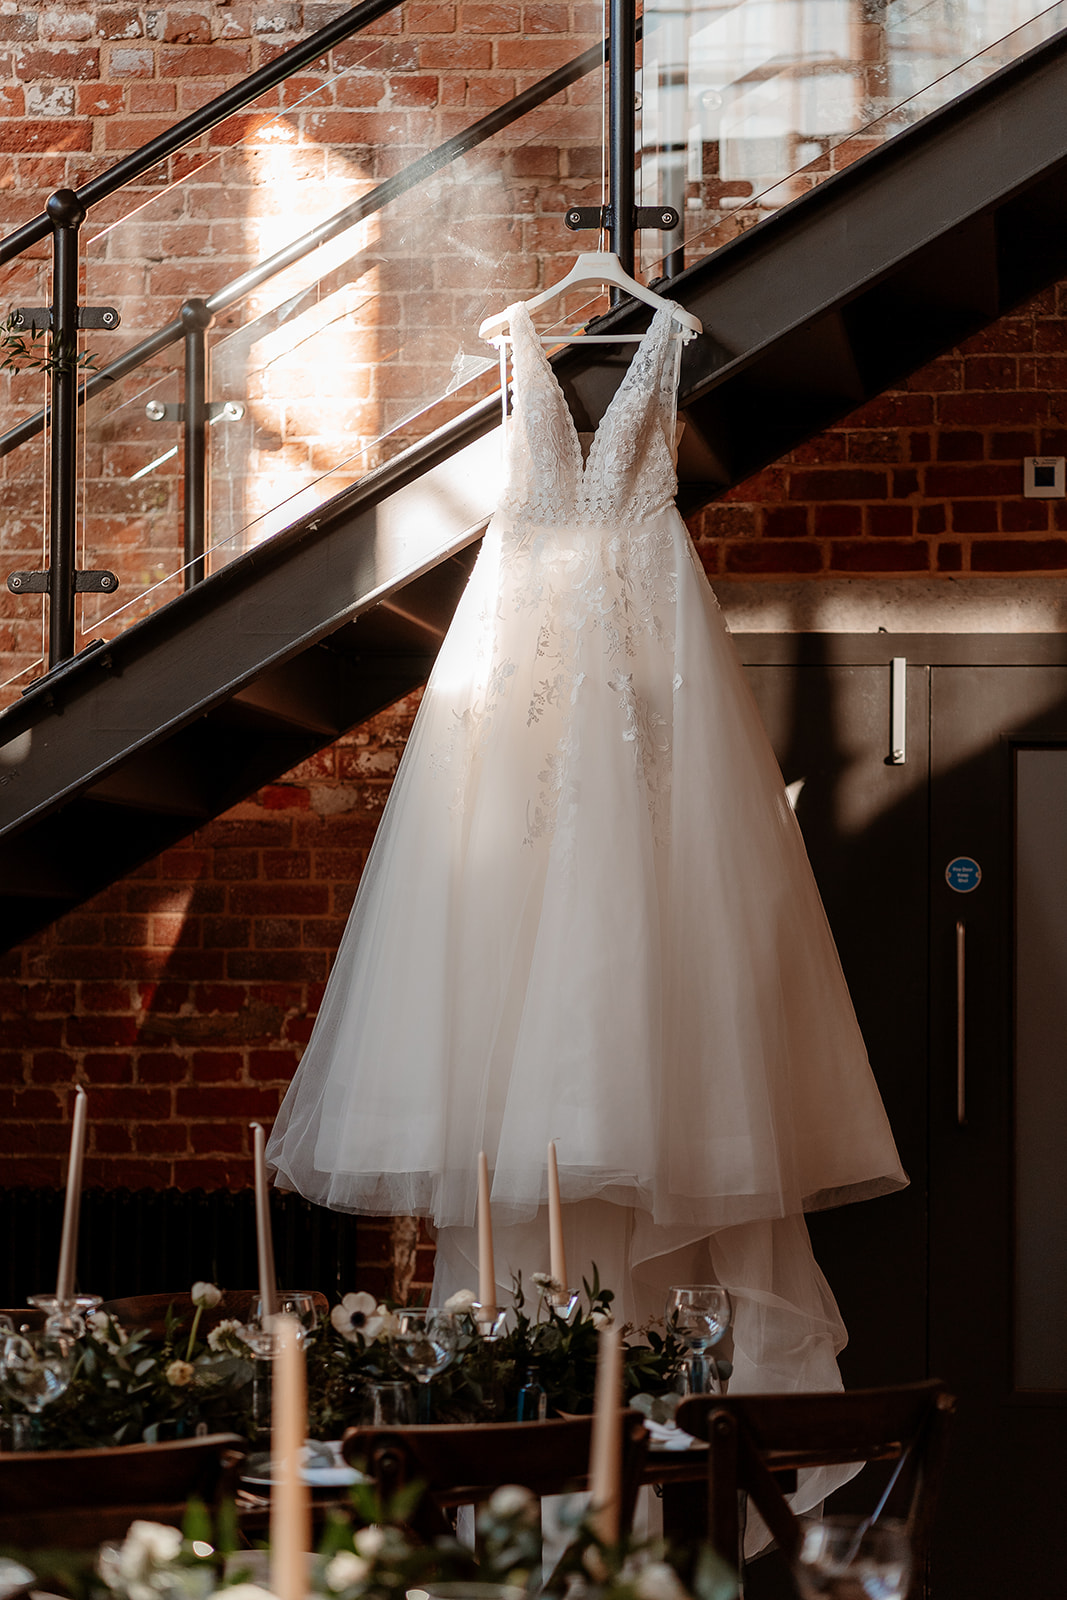 A white bridal ballgown hangs from a staircase with tables laid for a wedding breakfast in the foreground. 